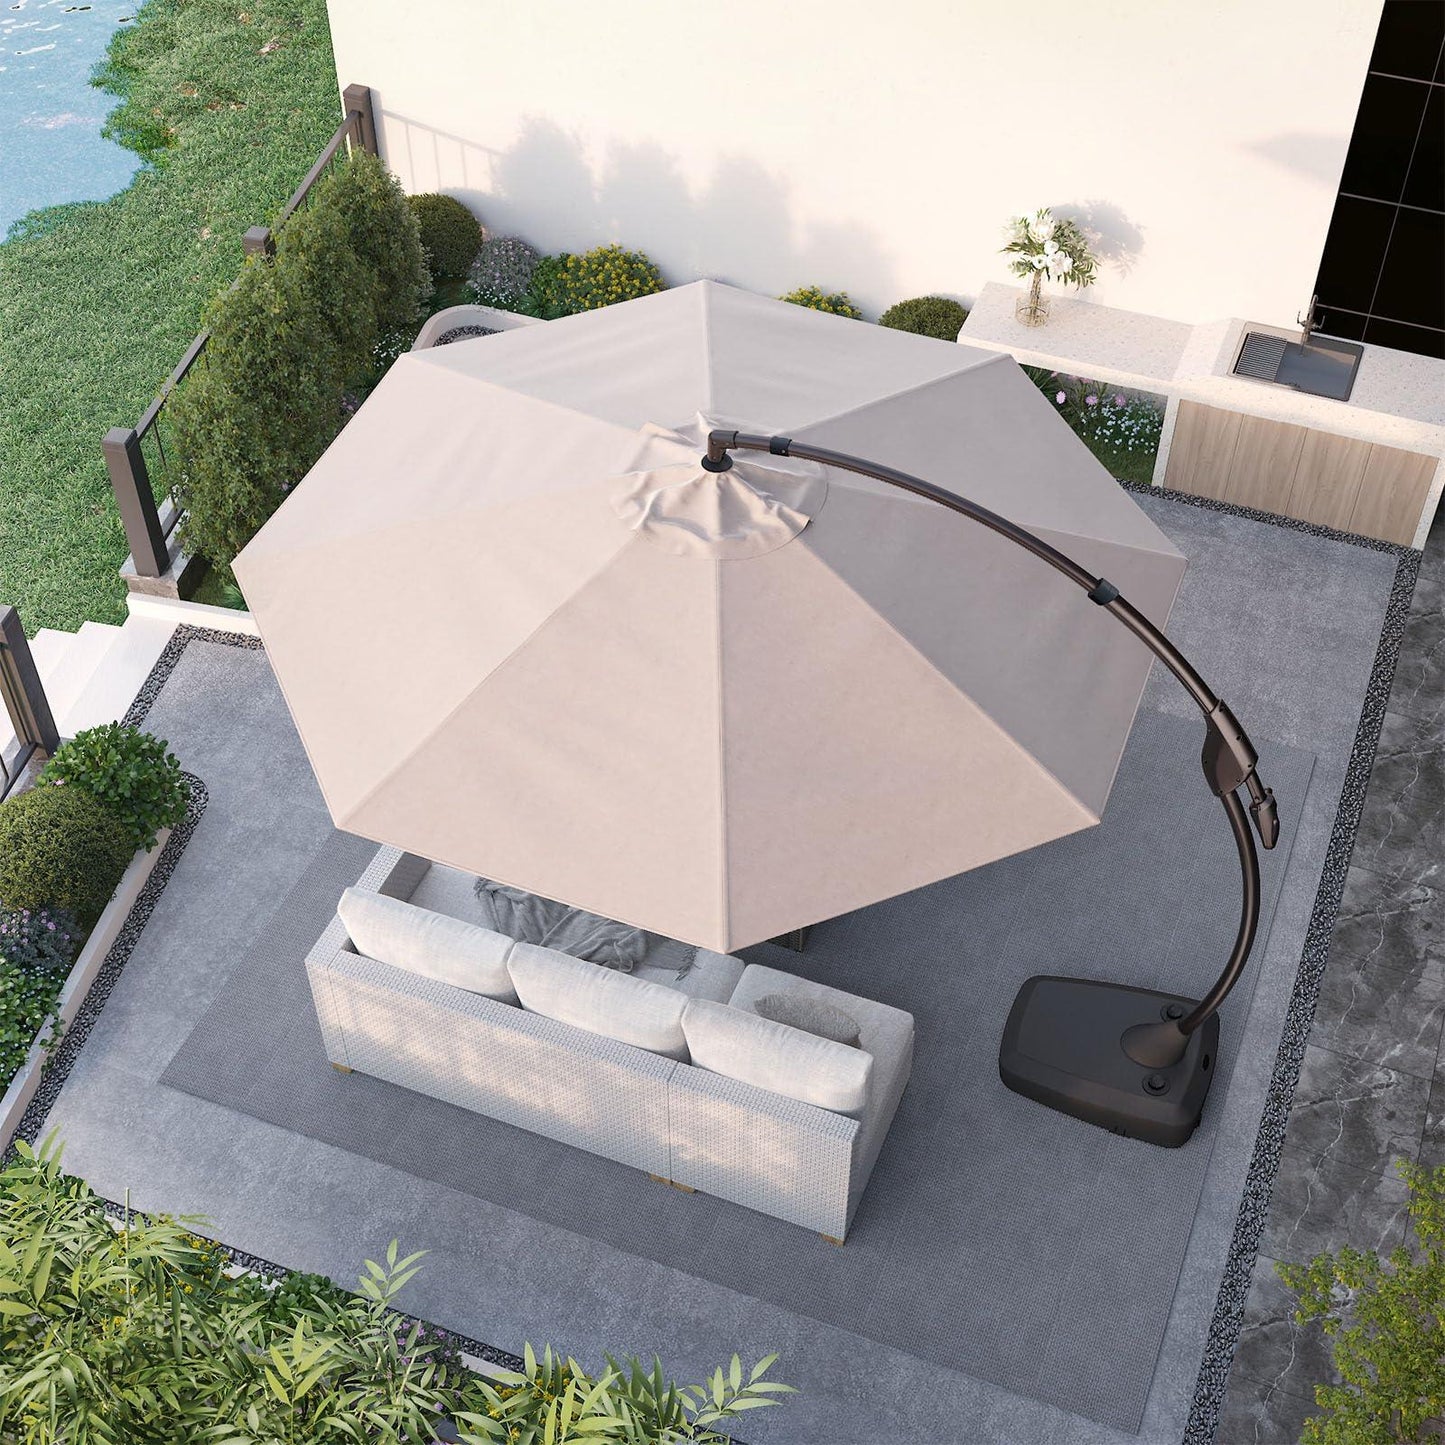 Grand patio Deluxe NAPOLI Patio Umbrella, Curvy Aluminum Cantilever Umbrella with Base, Round Large Offset Umbrellas for Garden Deck Pool (Champagne, 11 FT) - CookCave